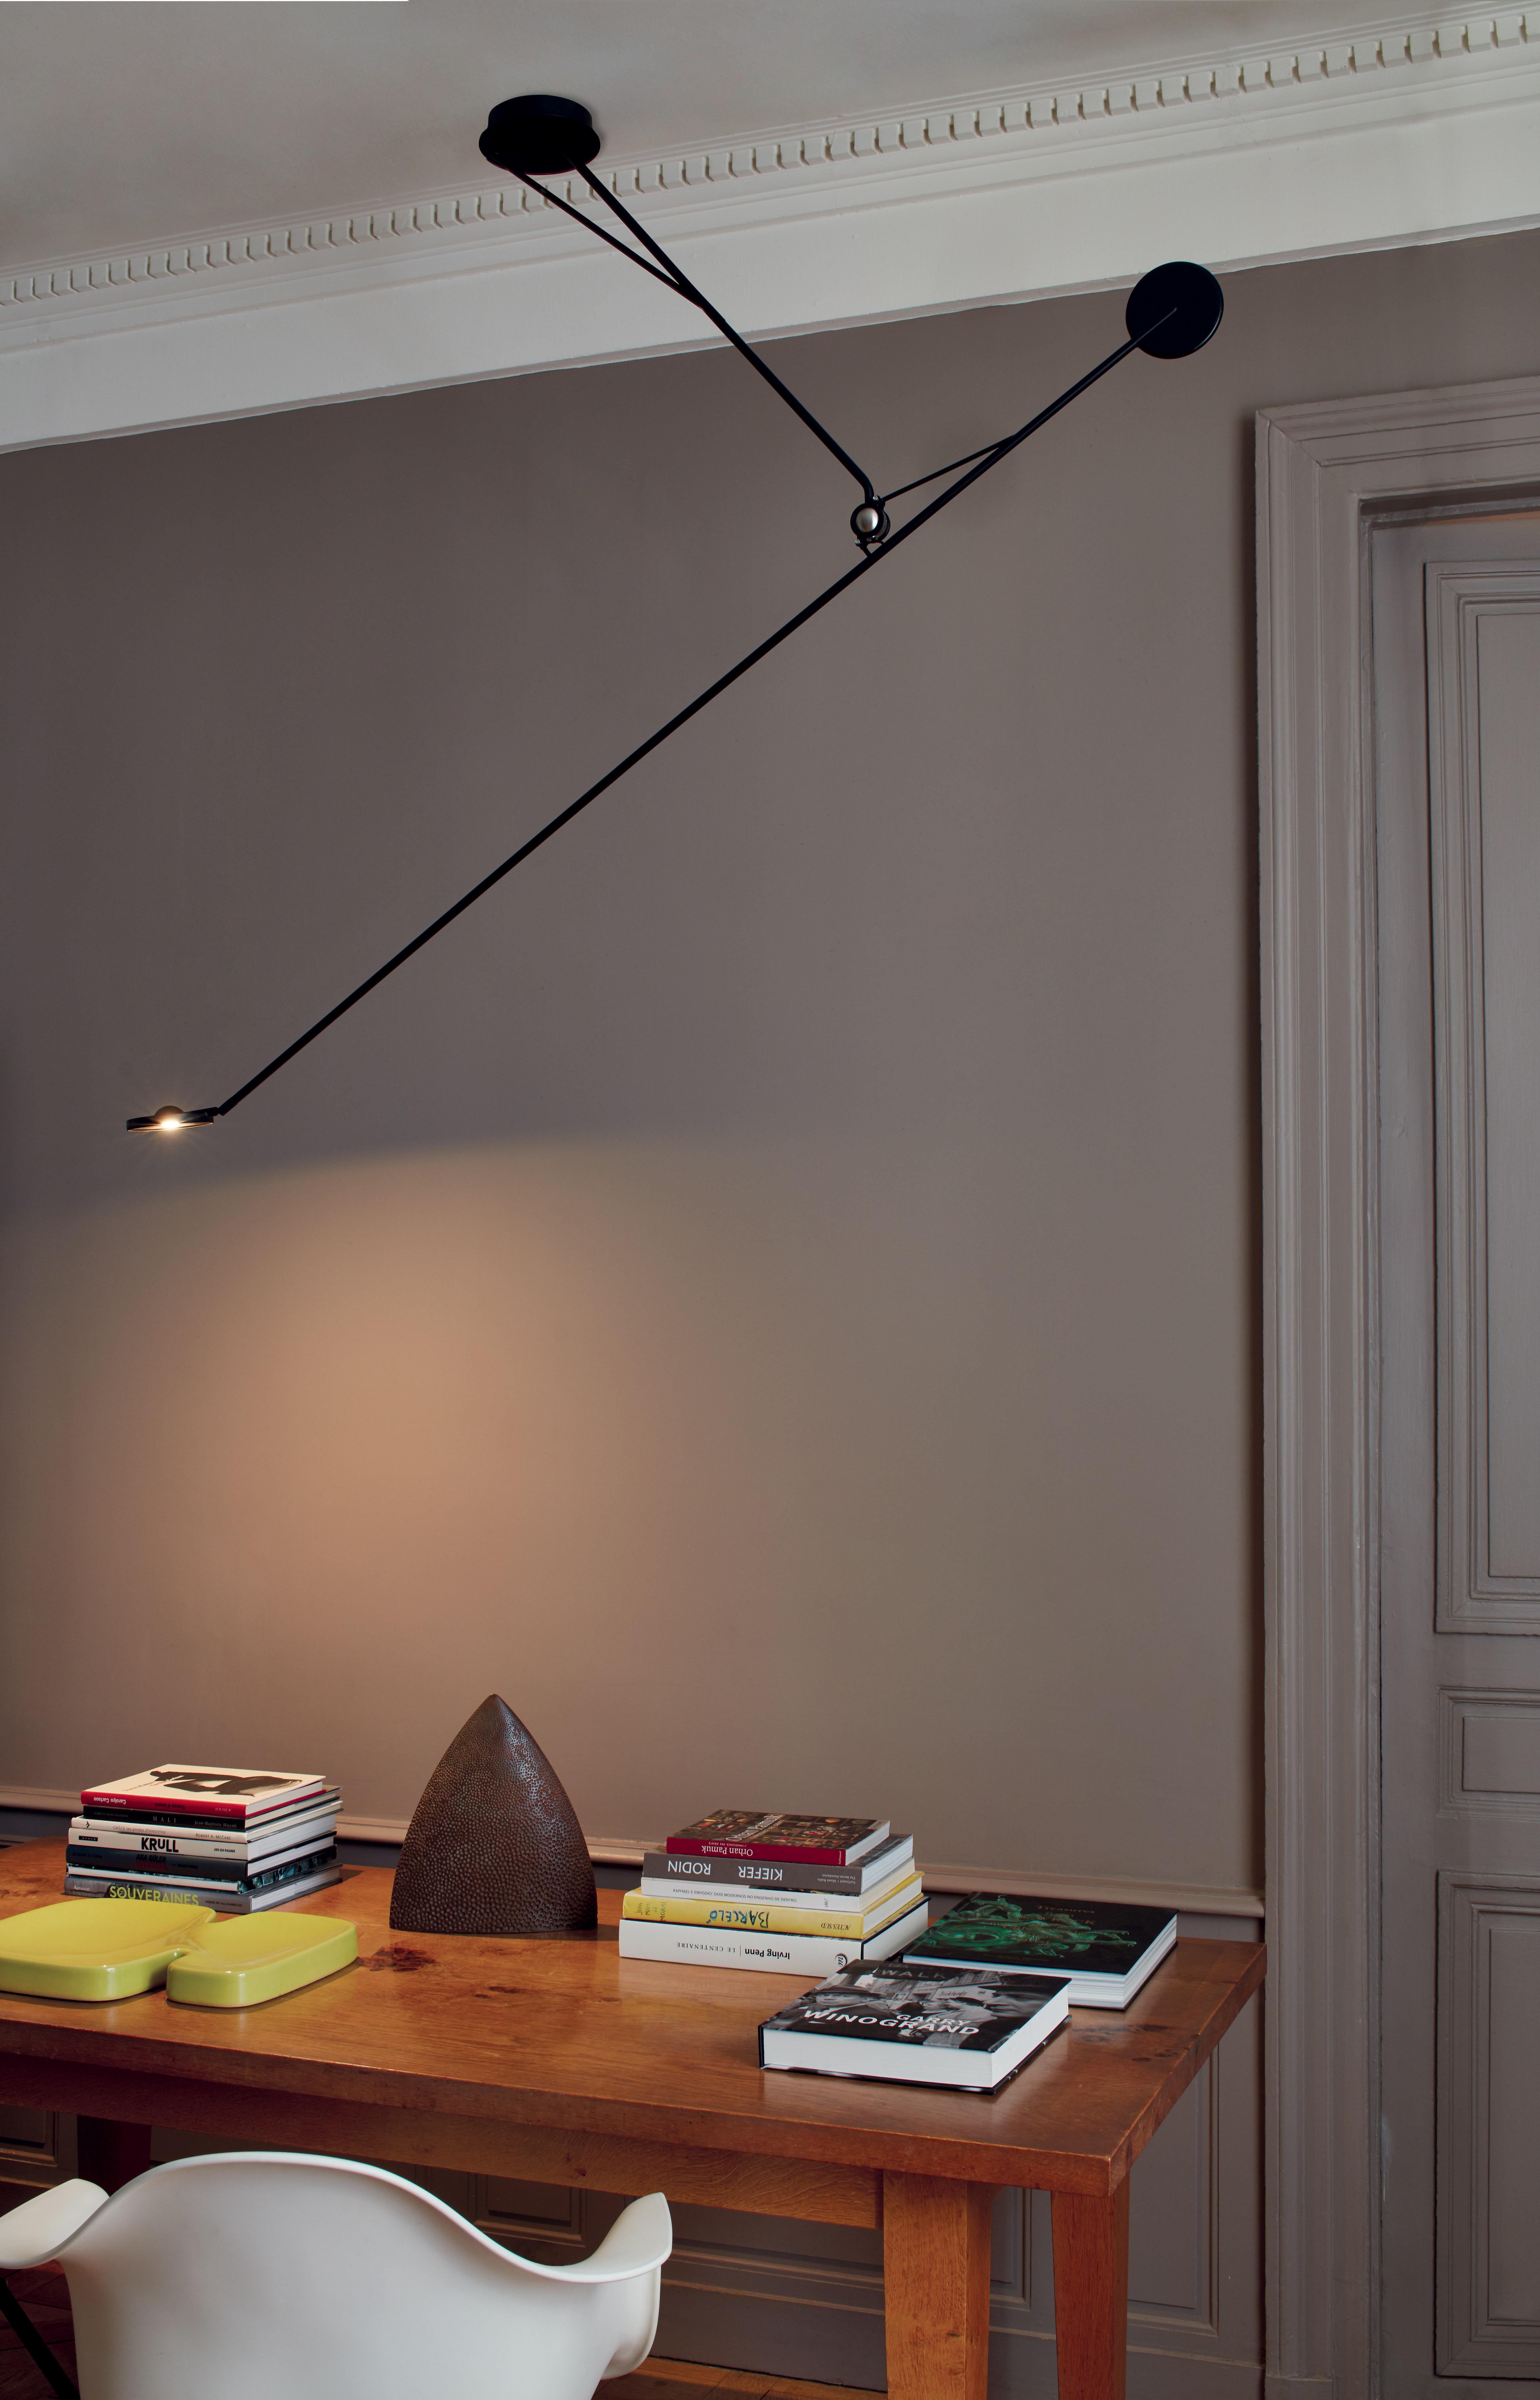 Aaro ceiling lamp by Simon Schmitz
Dimensions: D 16 x W 16 x H 148 cm
Materials: Aluminum, Steel
All our lamps can be wired according to each country. If sold to the USA it will be wired for the USA for instance.

Ceiling lamp in steel and